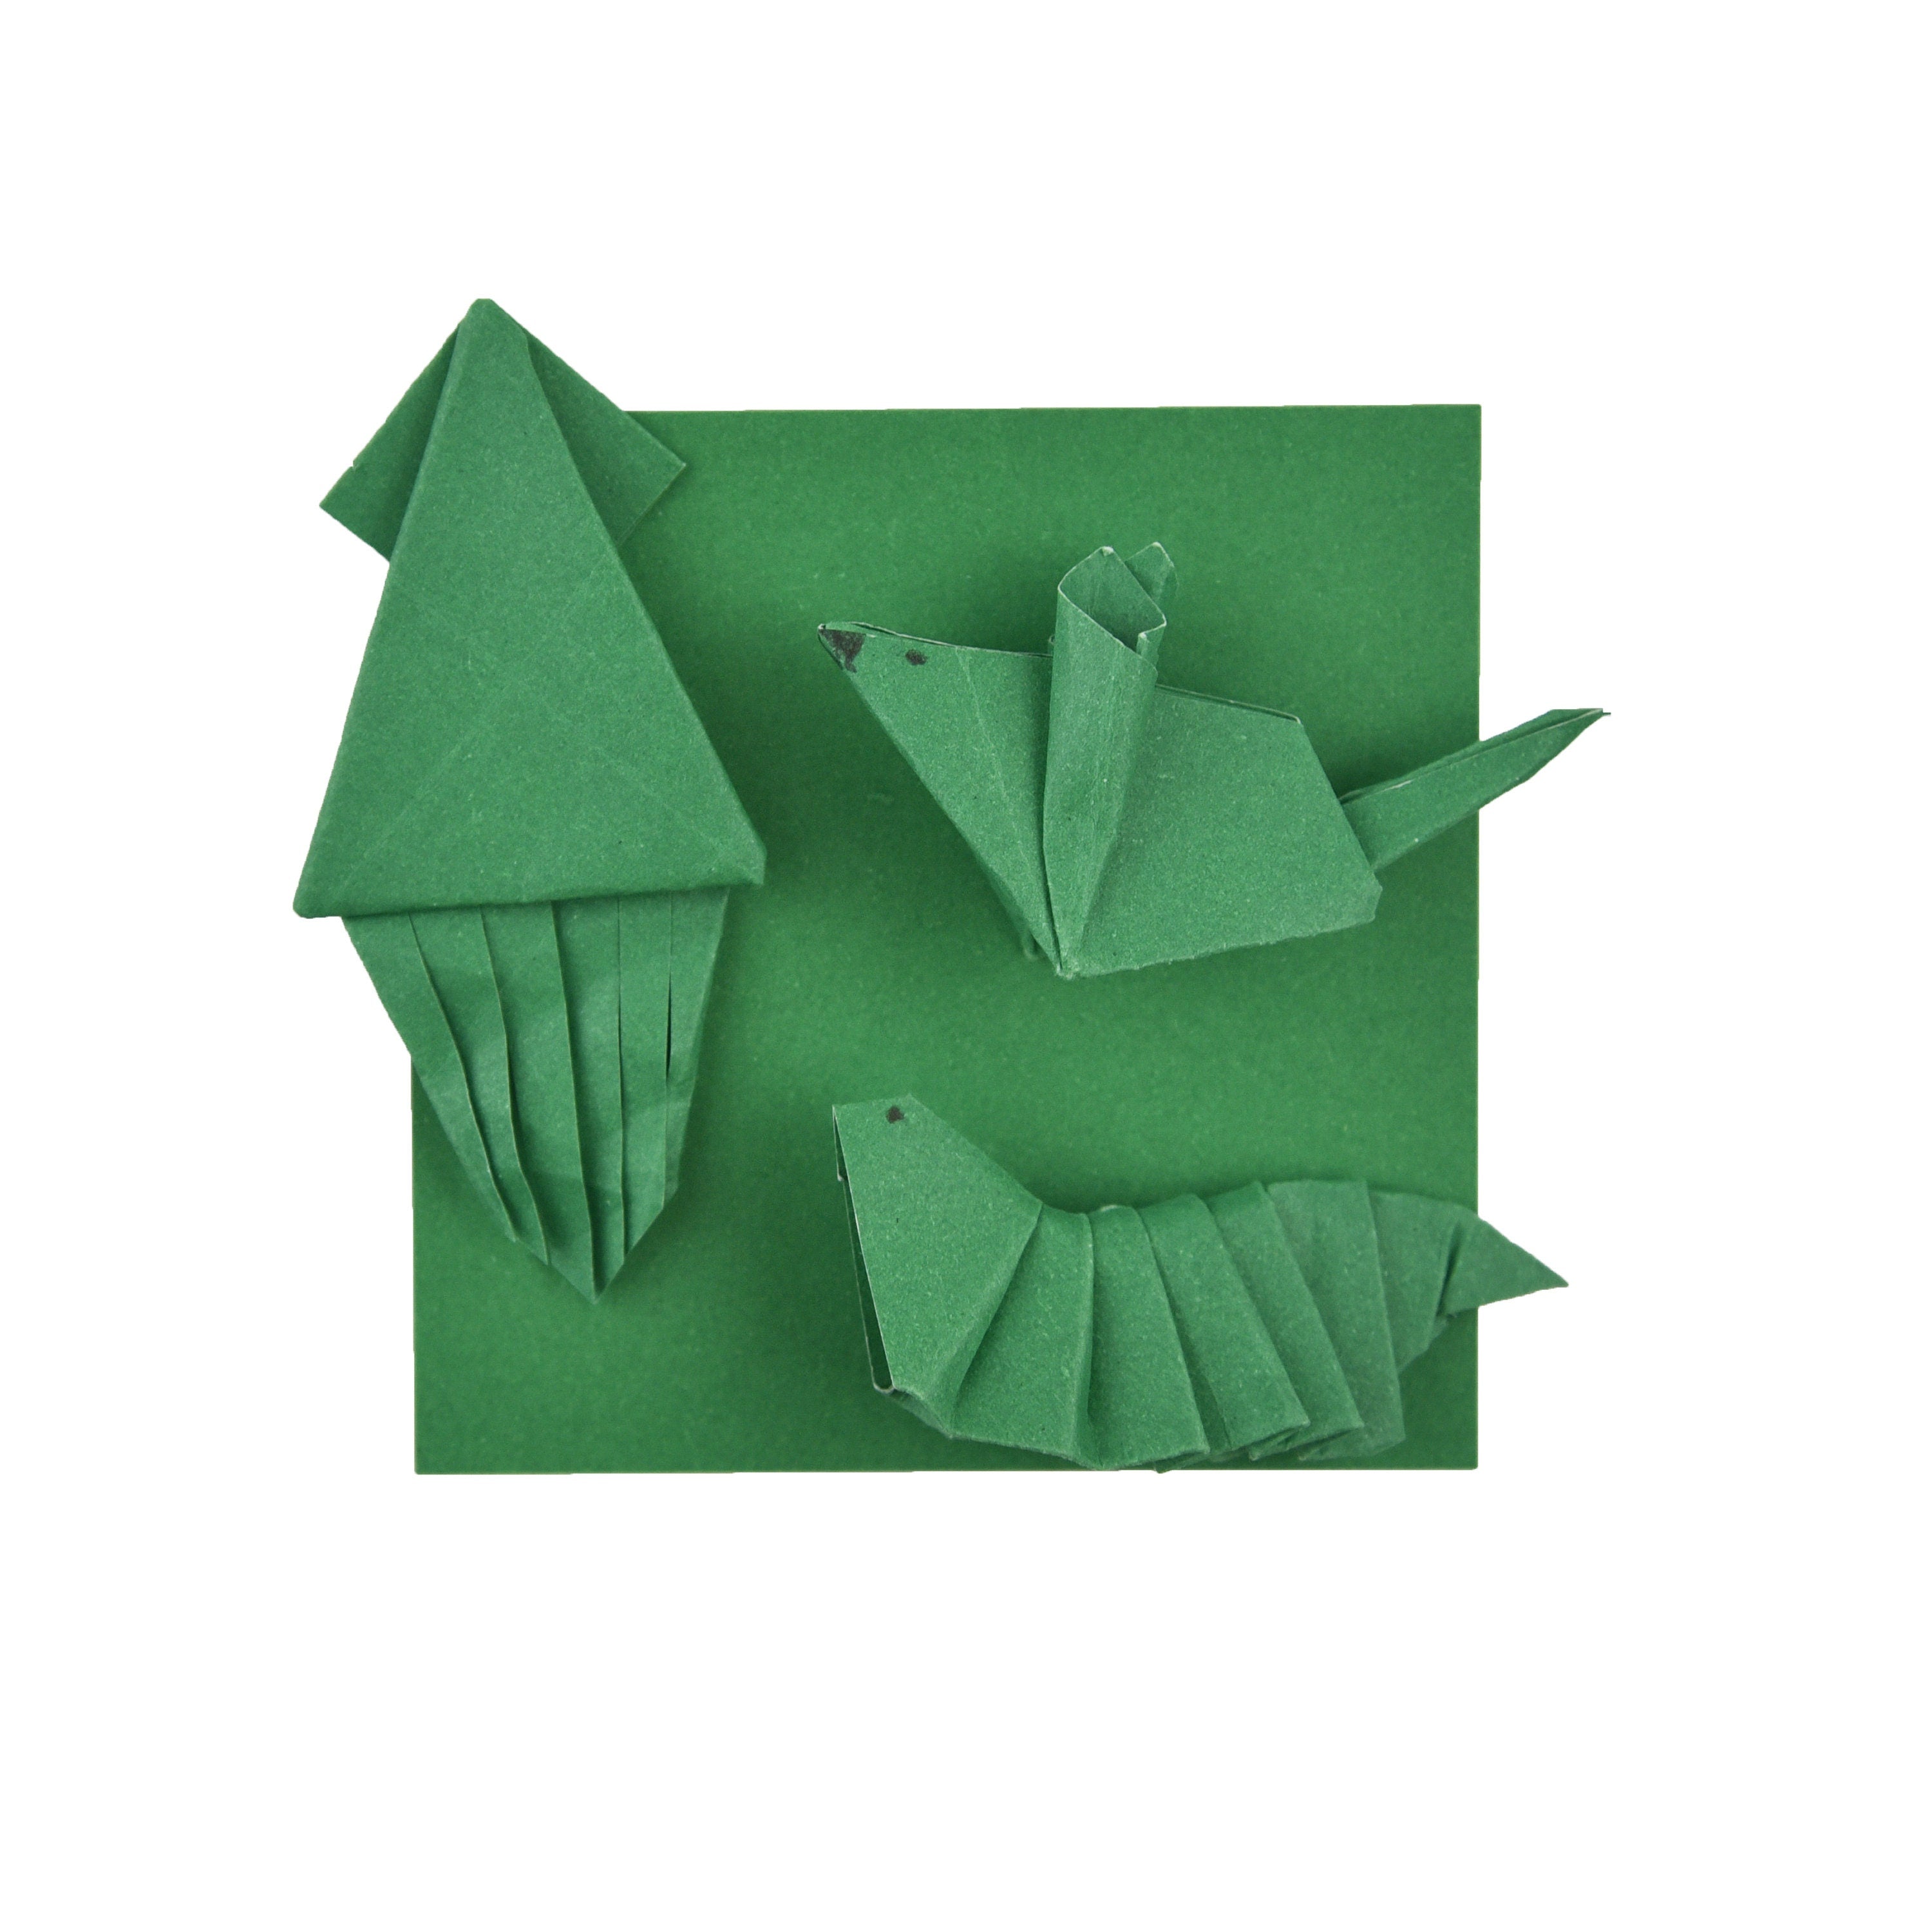 100 GreenOrigami Paper Sheets 3x3 inches Square Paper Pack for Folding, Origami Cranes, and Decoration - S24